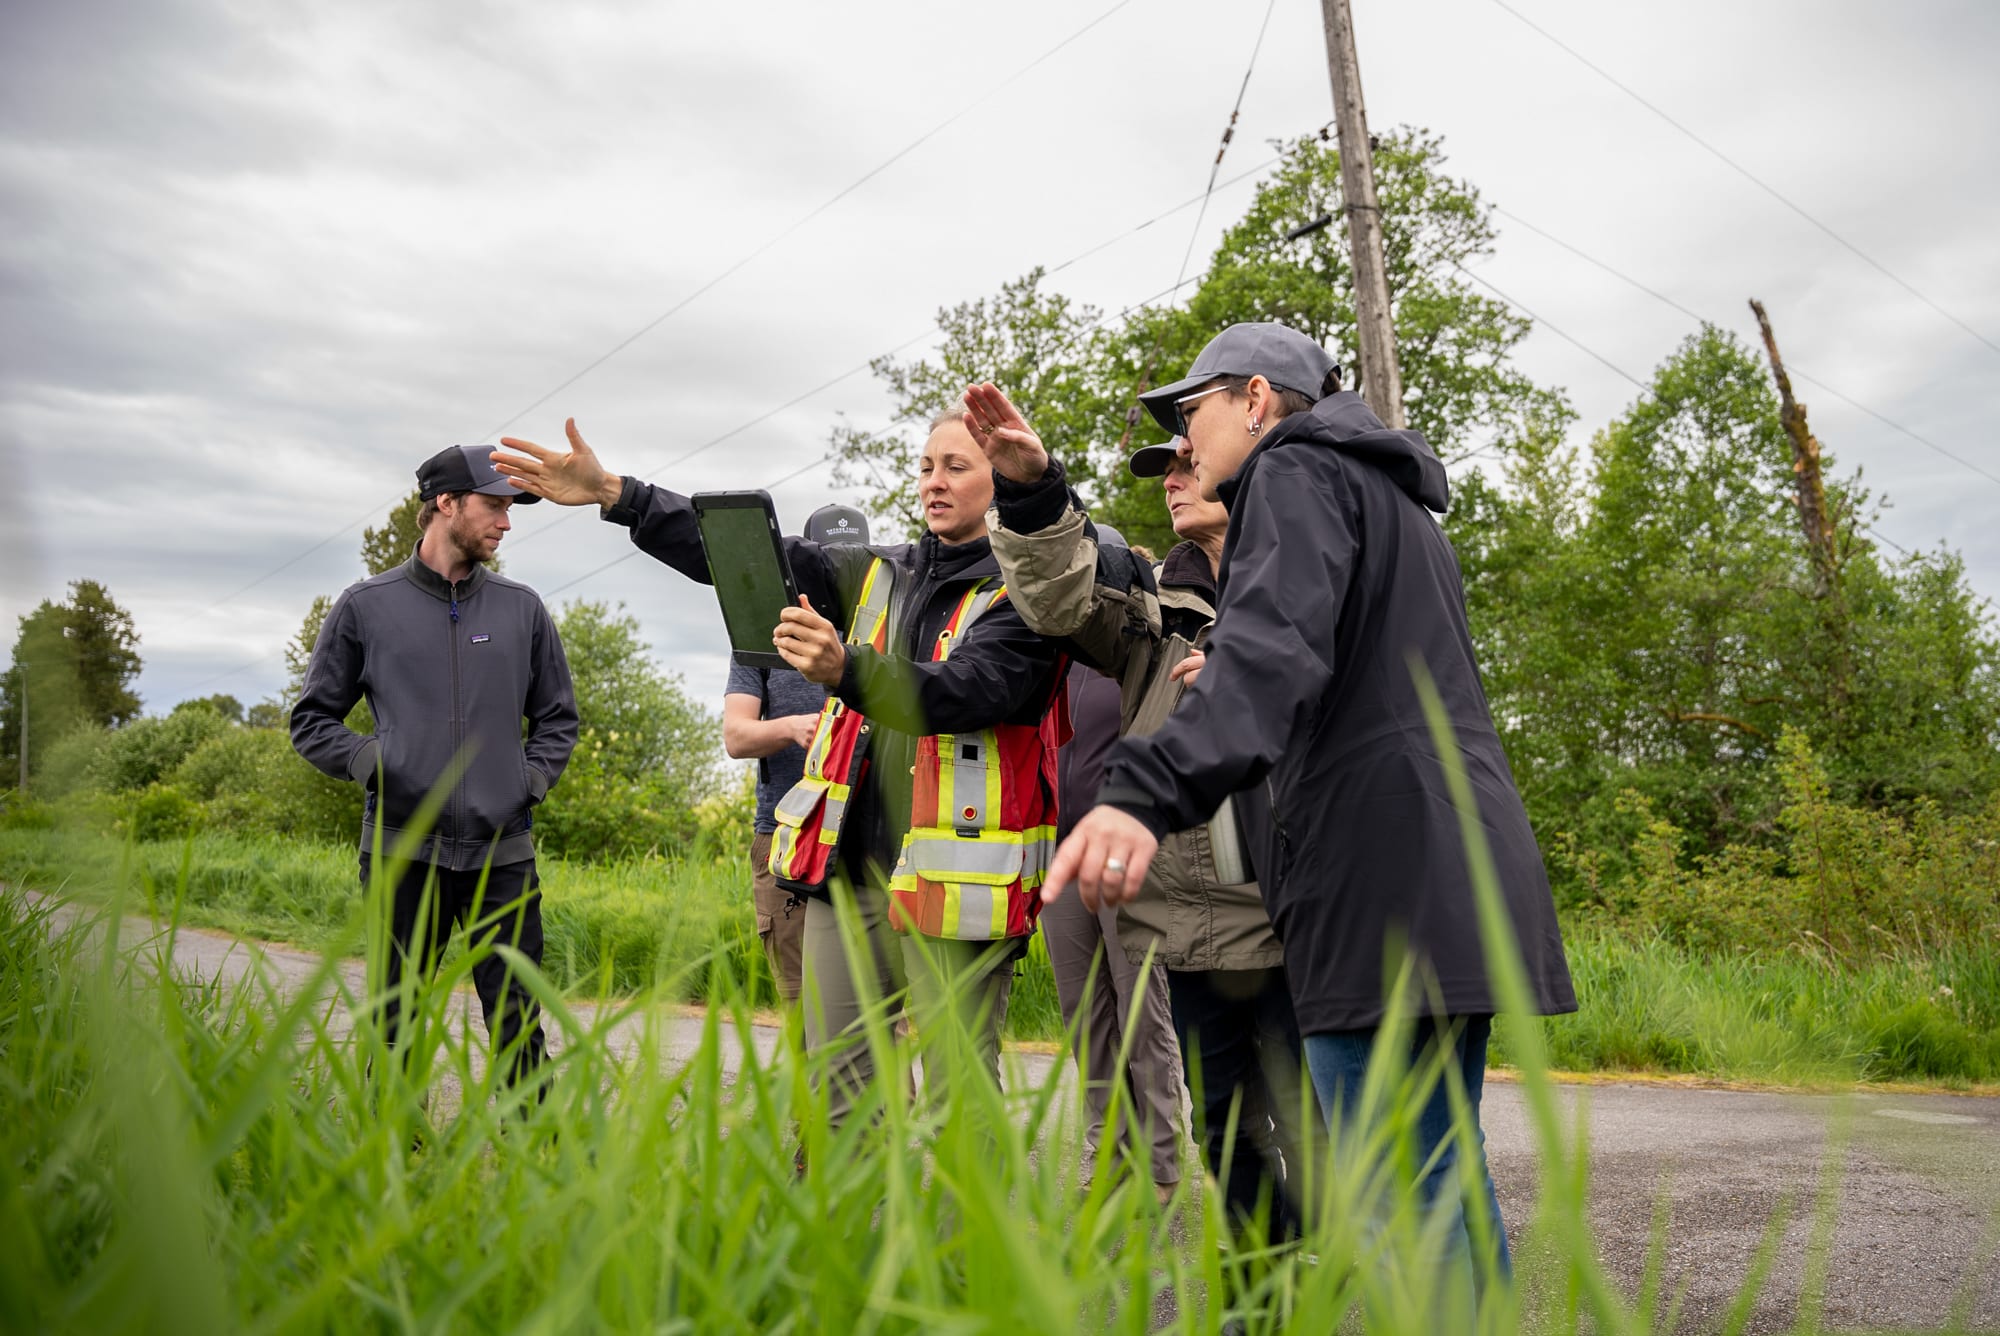 Sam Penner, Lower Mainland Field Operations Technician, examines the map with the team, pointing out landmarks to describe the property.